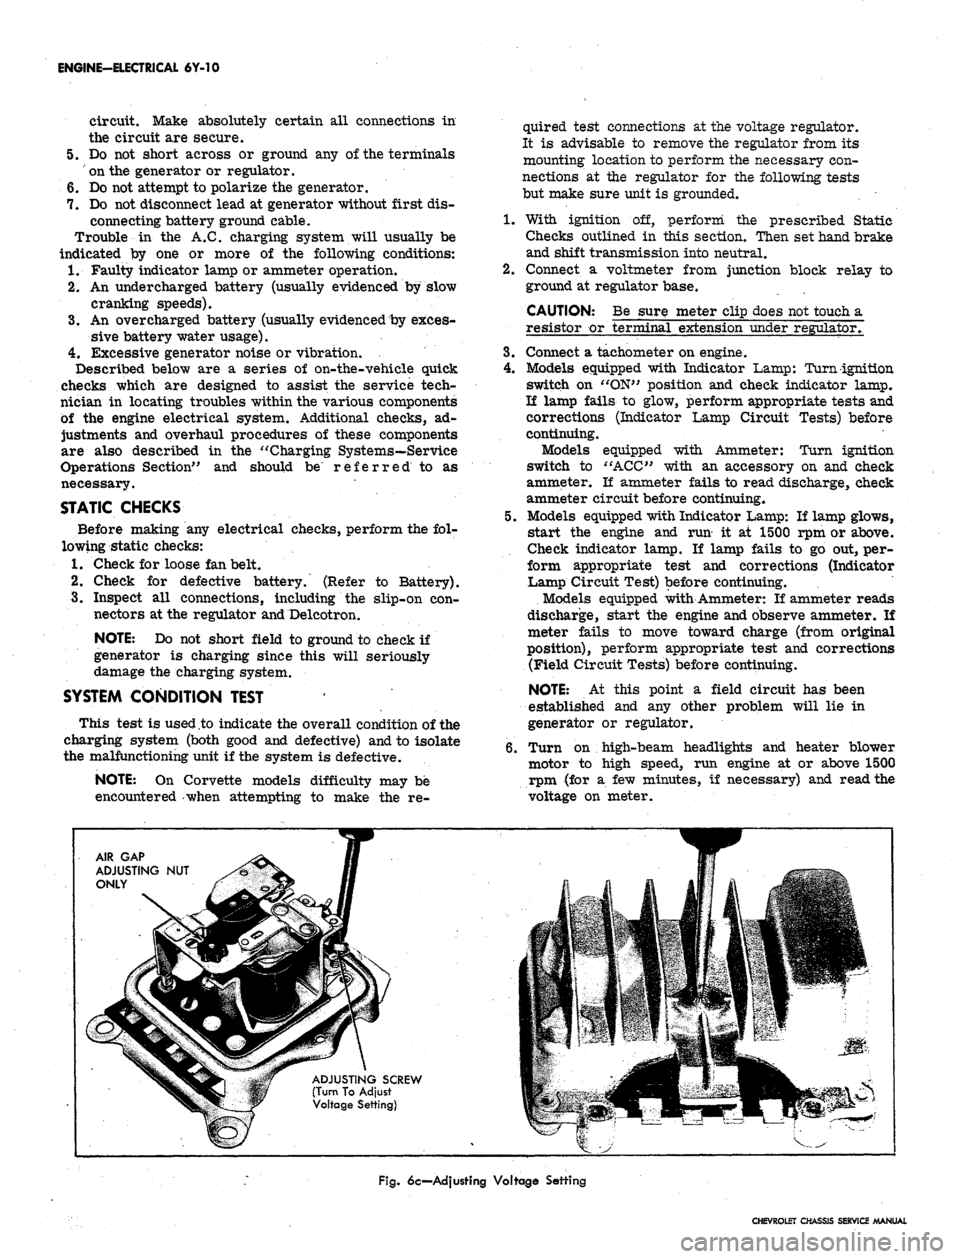 CHEVROLET CAMARO 1967 1.G Chassis Workshop Manual 
ENGINE-ELECTRICAL 6Y-10

circuit. Make absolutely certain all connections in

the circuit are secure.

5.
 Do not short across or ground any of the terminals

on the generator or regulator.

6. Do no